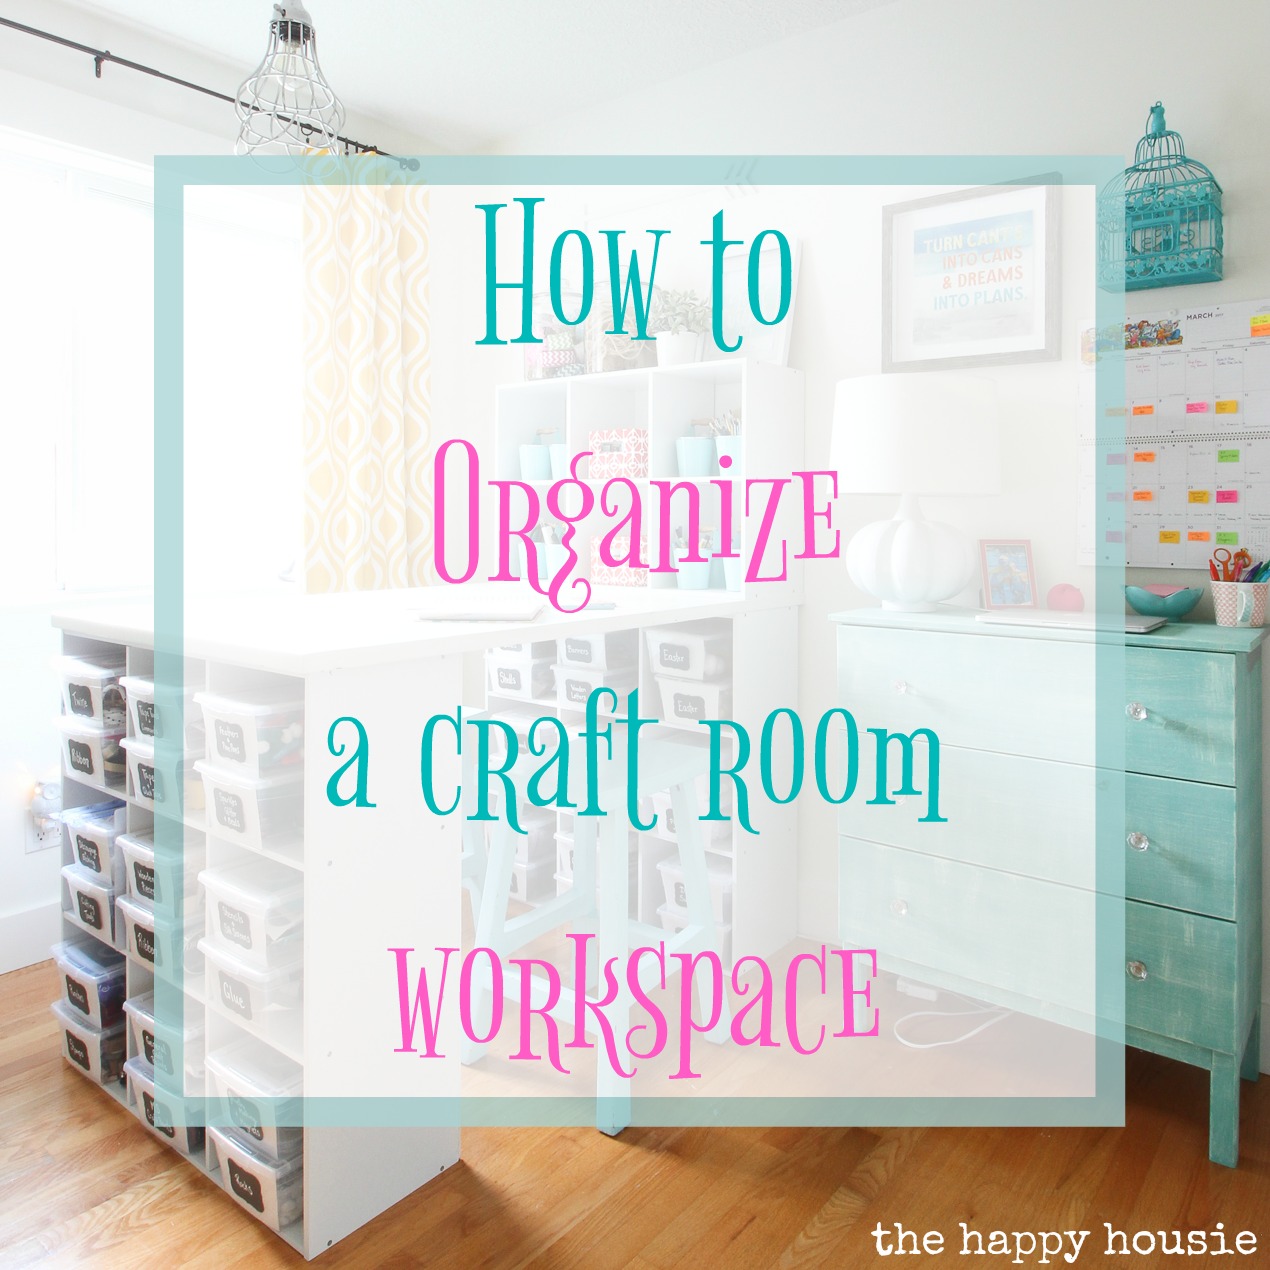 https://www.thehappyhousie.com/wp-content/uploads/2017/03/This-post-is-full-of-super-creative-cute-and-thrifty-ideas-for-how-to-organize-a-craft-room-workspace.jpg